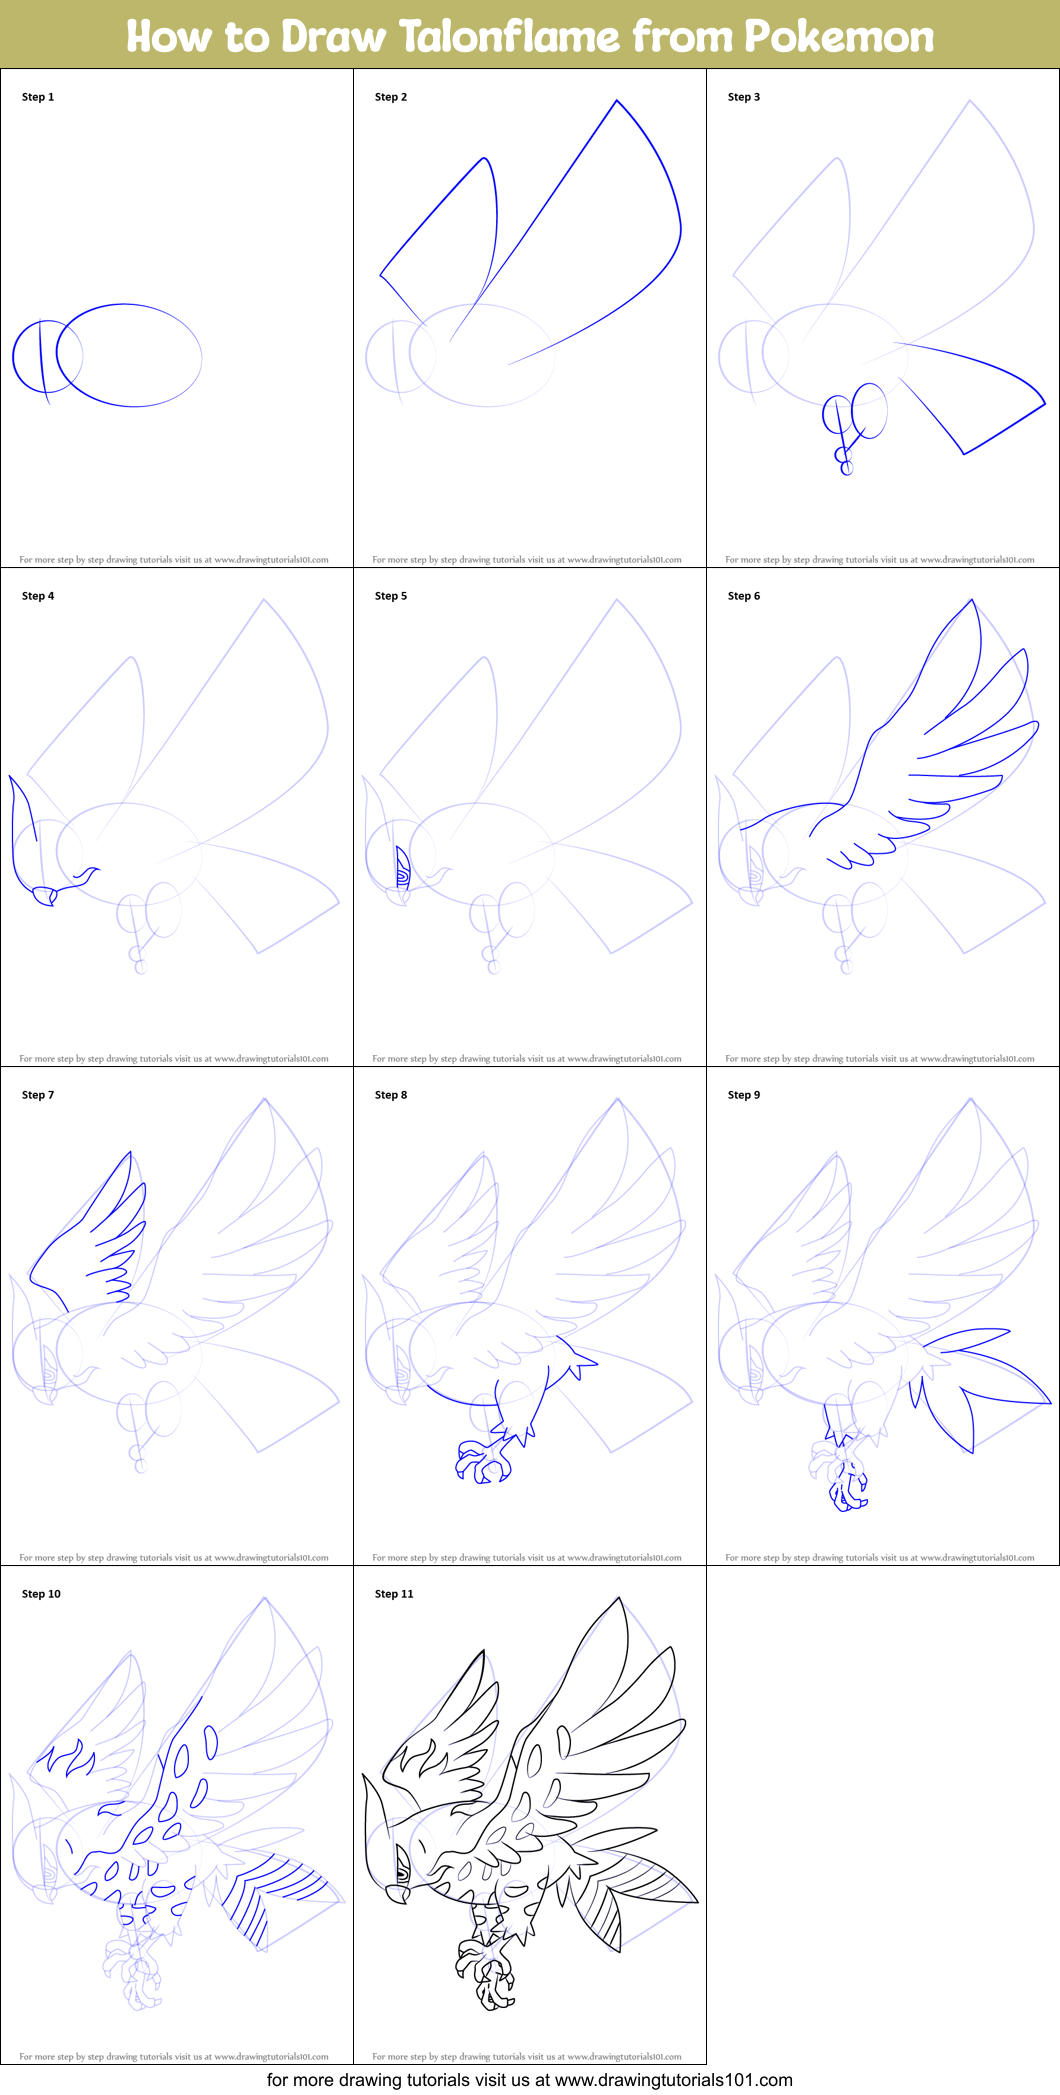 How to Draw Talonflame from Pokemon printable step by step drawing